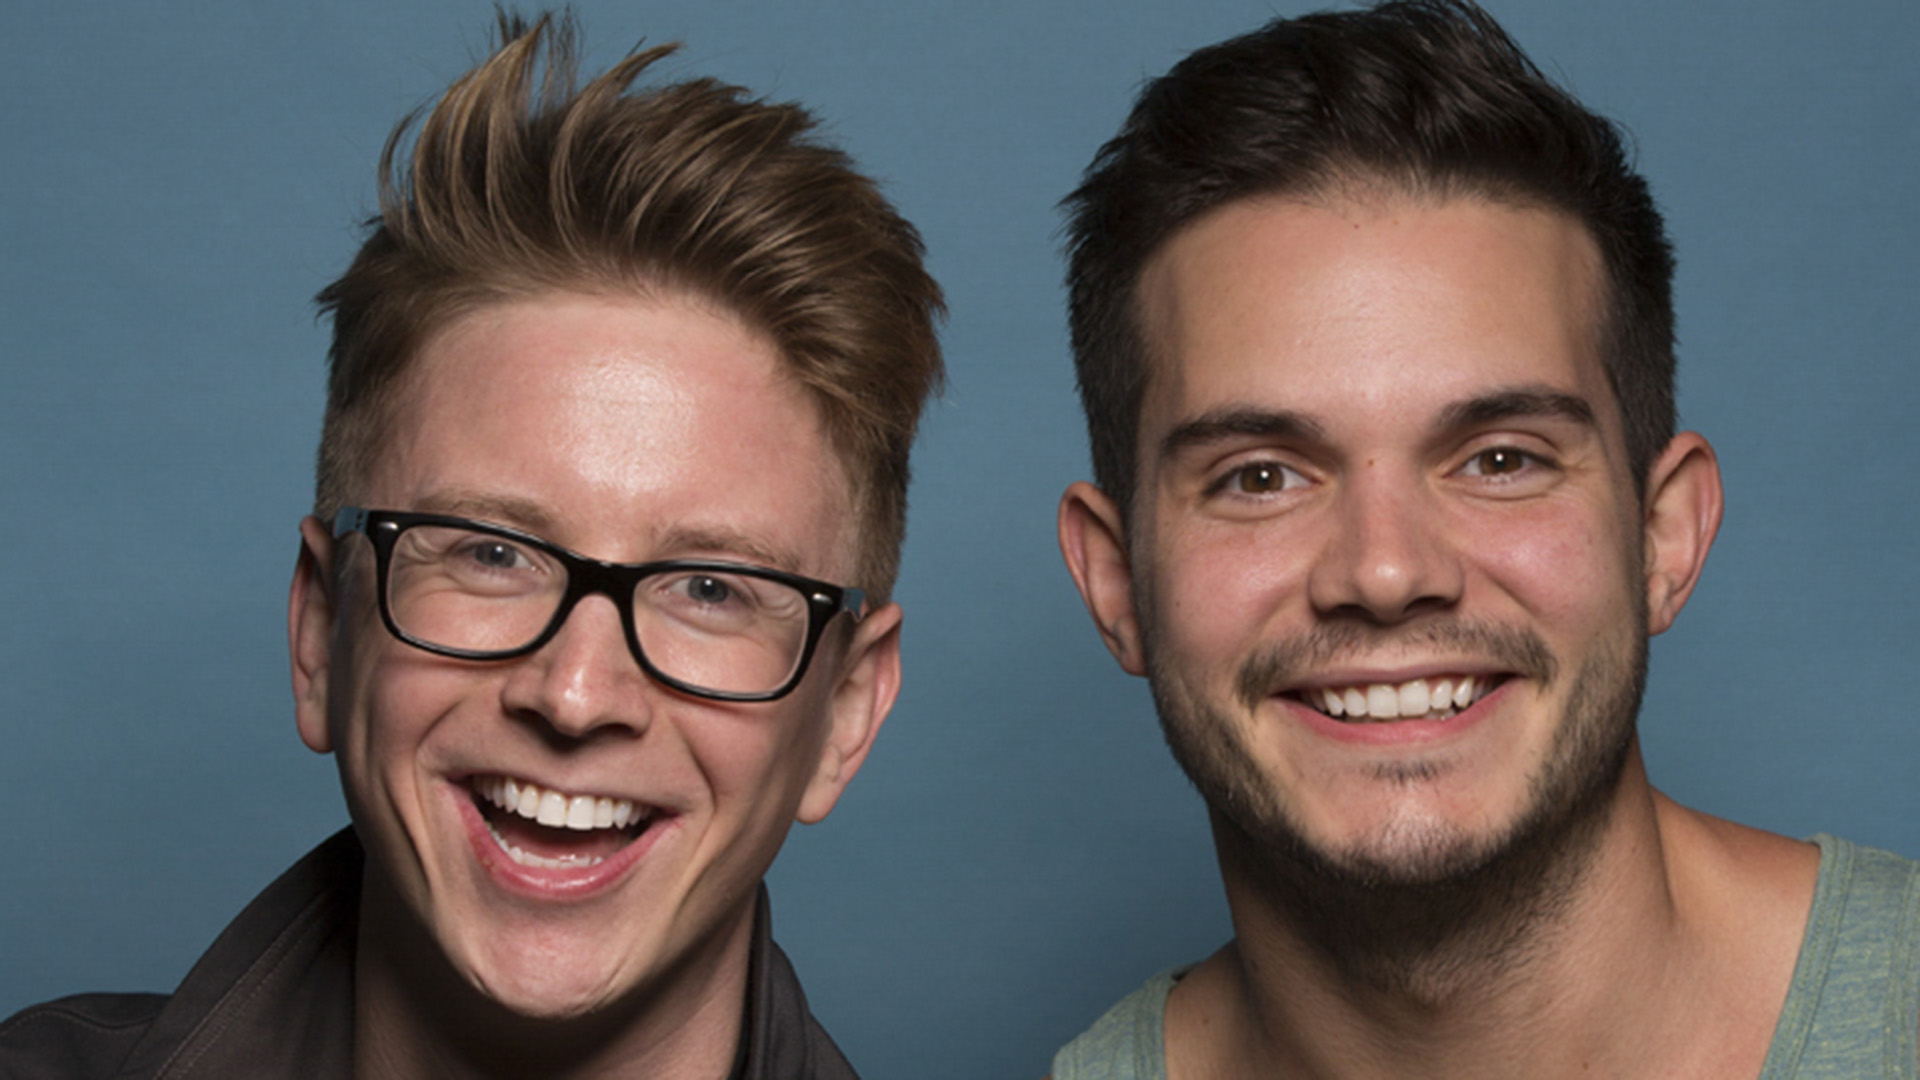 Tyler and Korey came in third place on Season 28 of The Amazing Race.